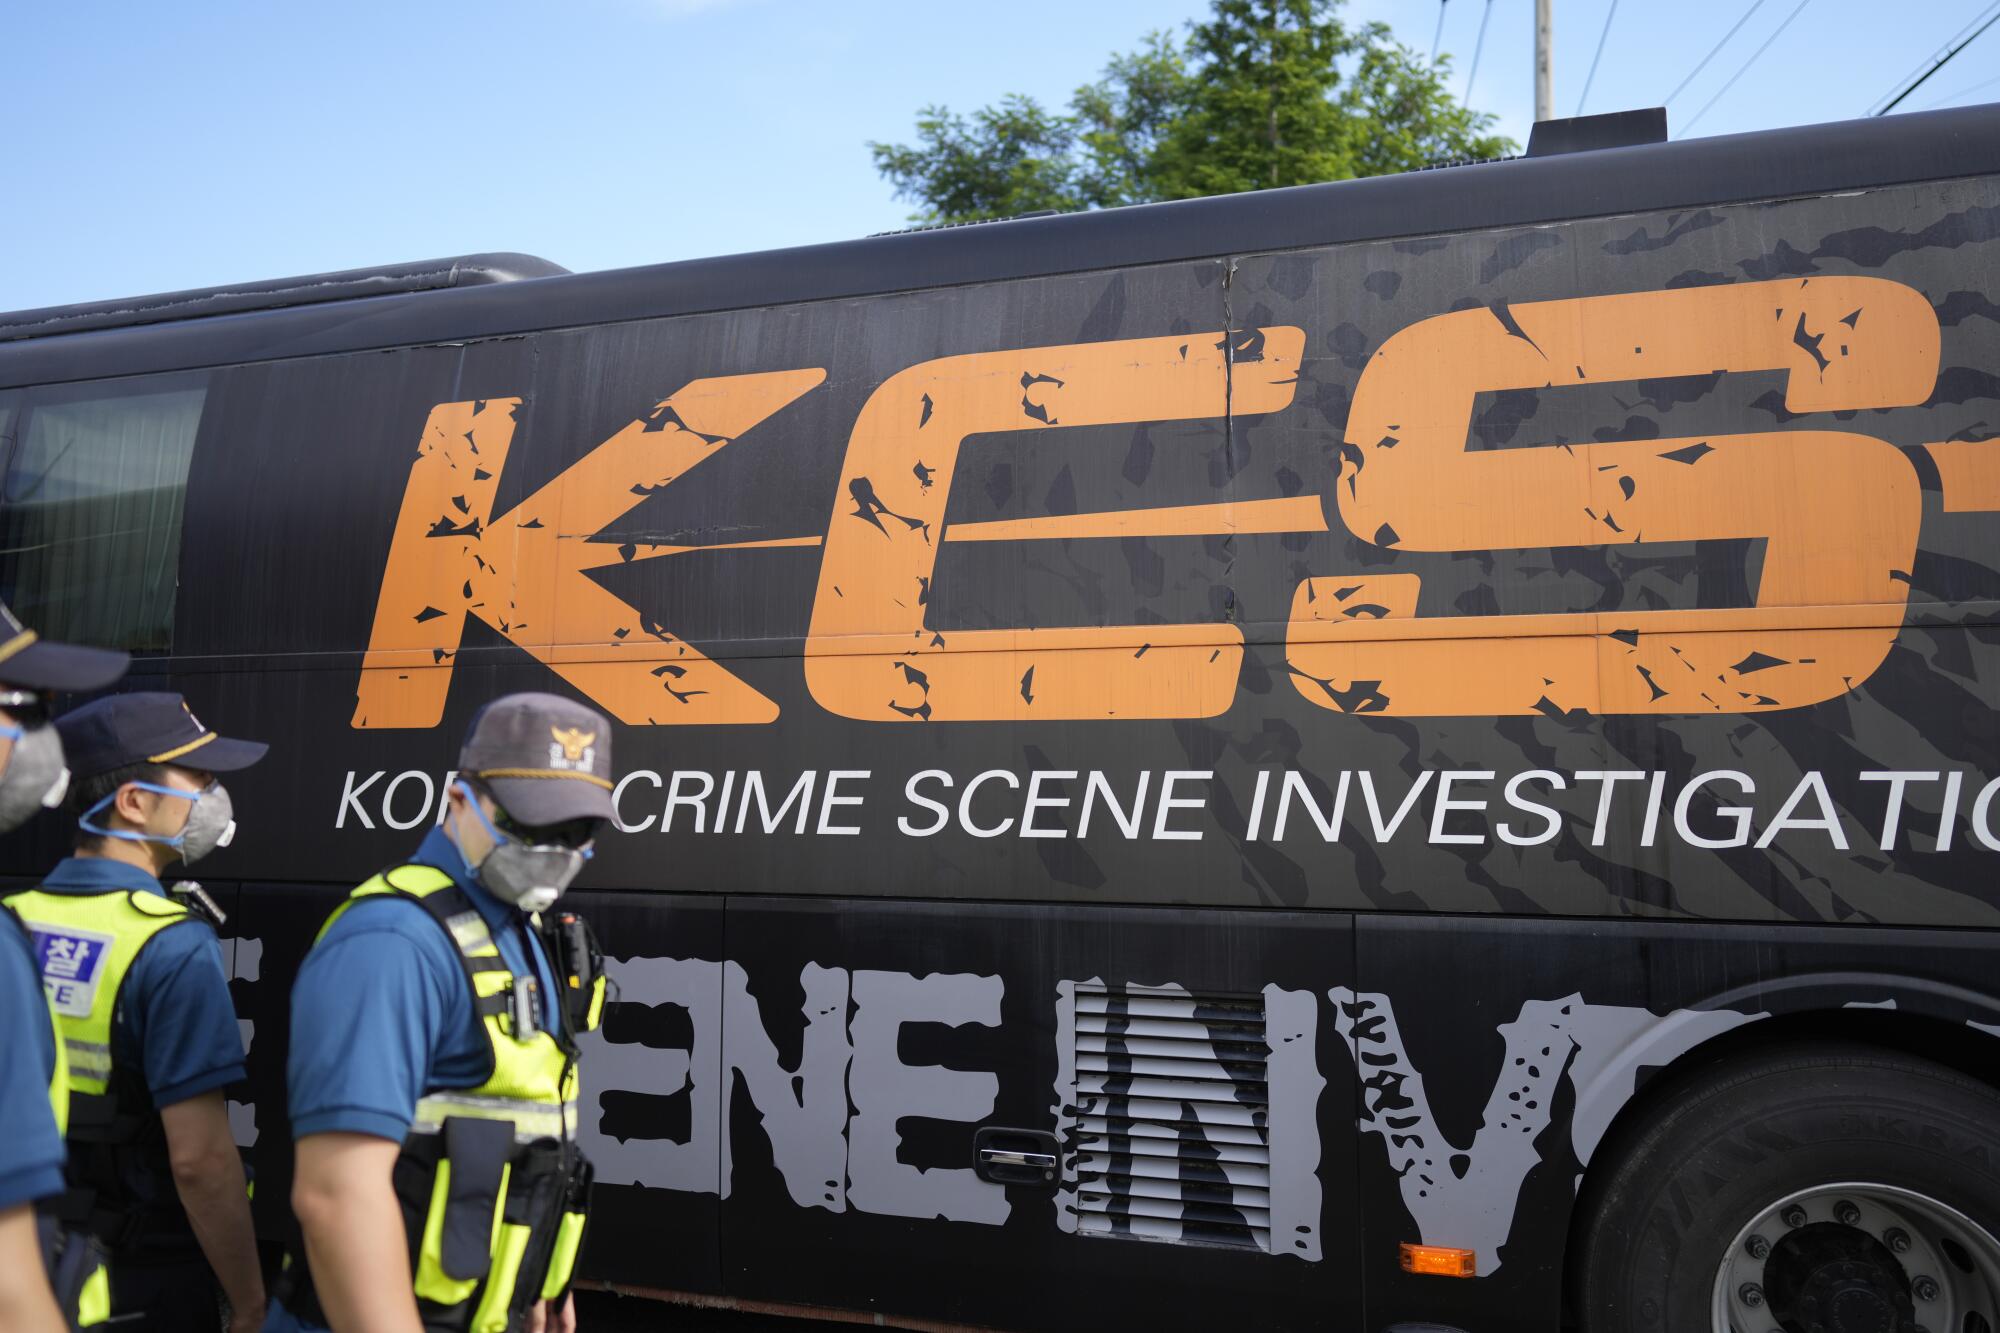 A vehicle marked "crime scene investigation" passes workers in yellow safety vests.